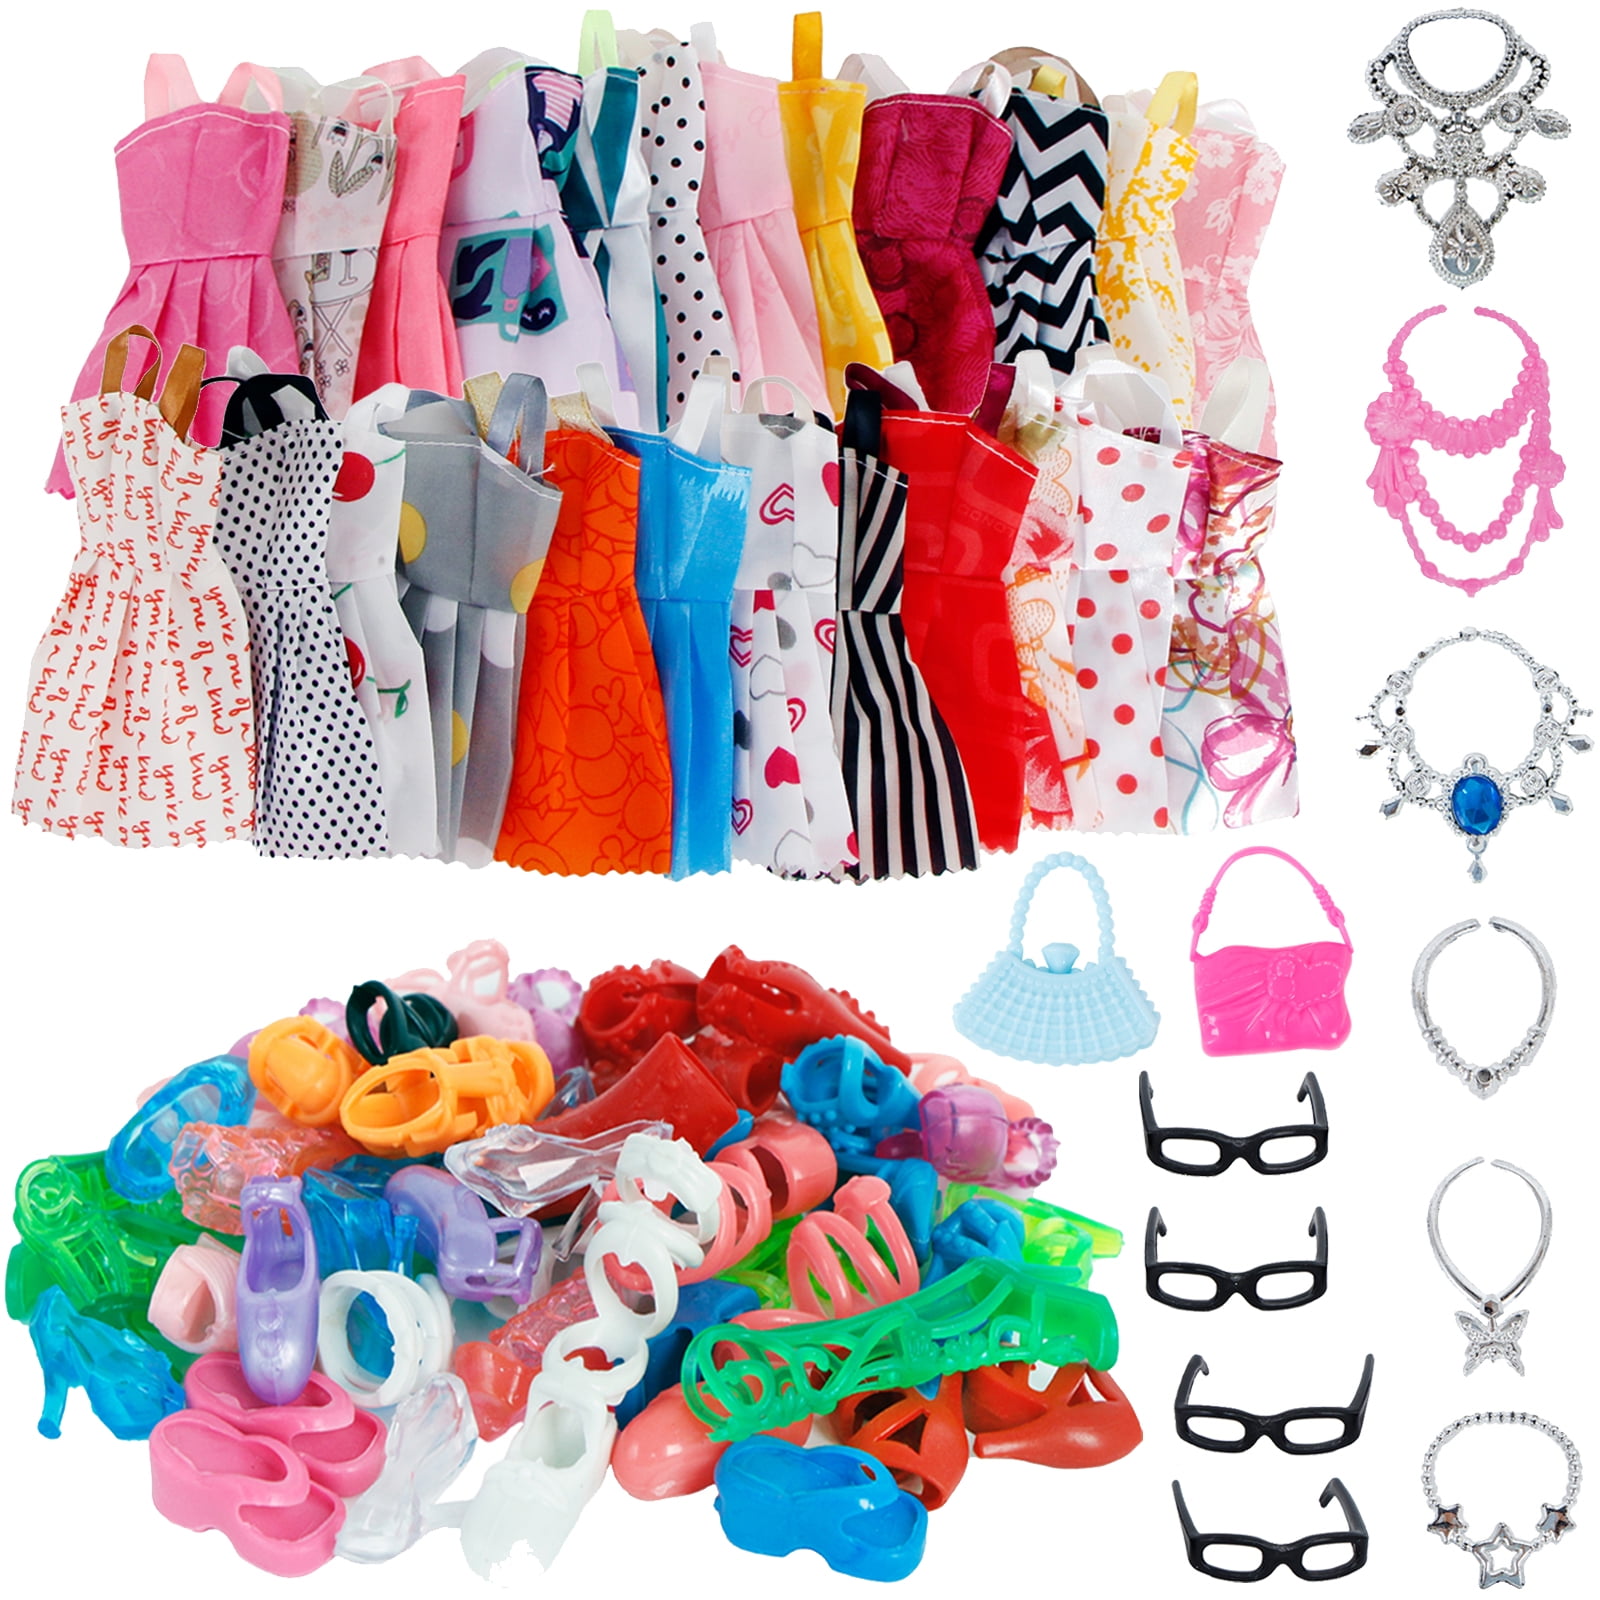 Girl Fashion Toy 32 Itemset Doll Accessories Clothes For Barbie Doll